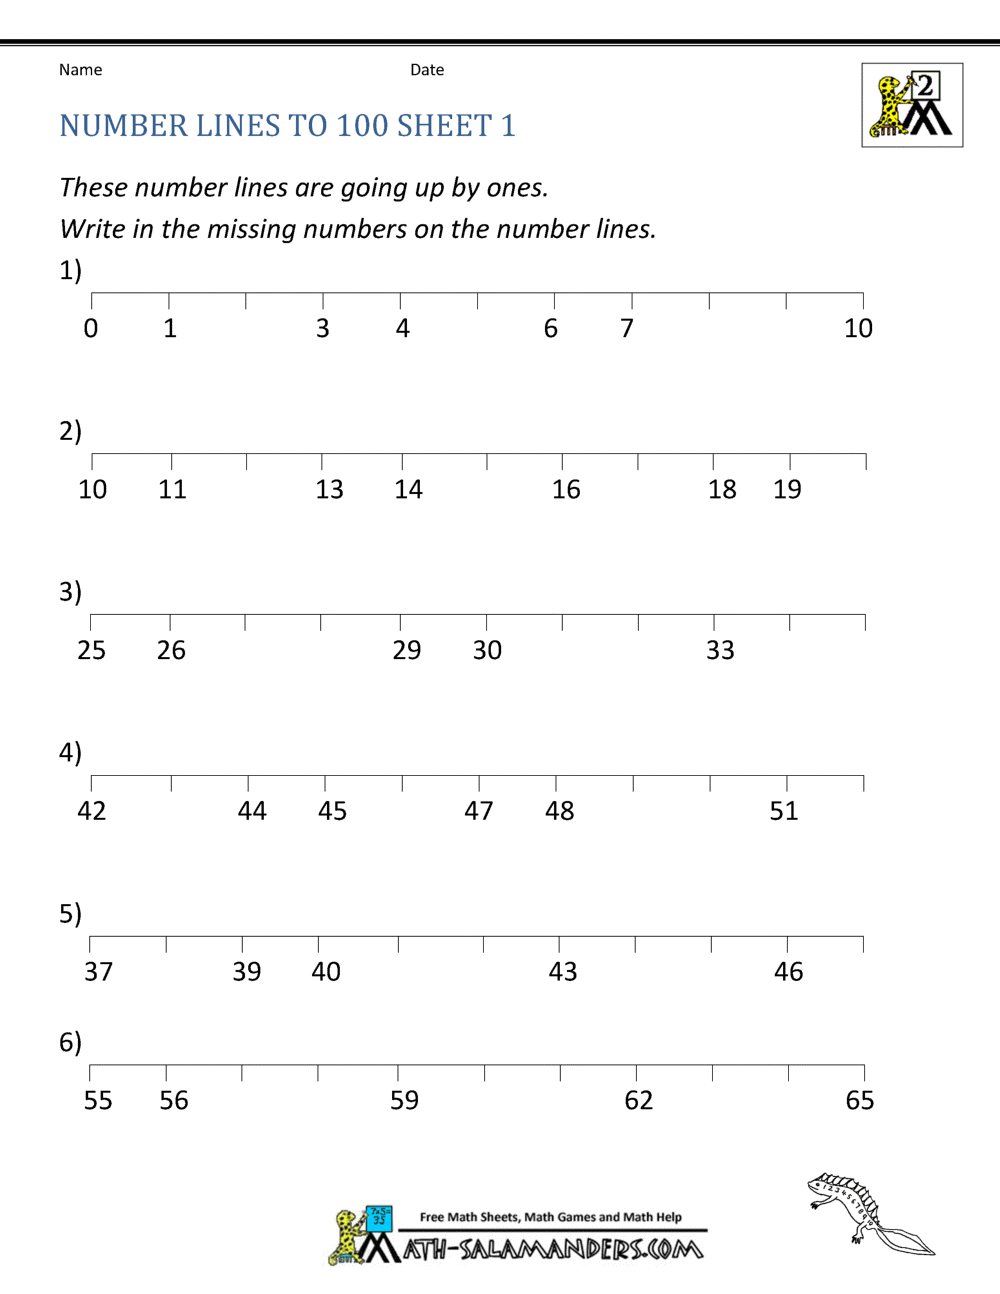 Number Lines Worksheets - Counting by 1s and halves